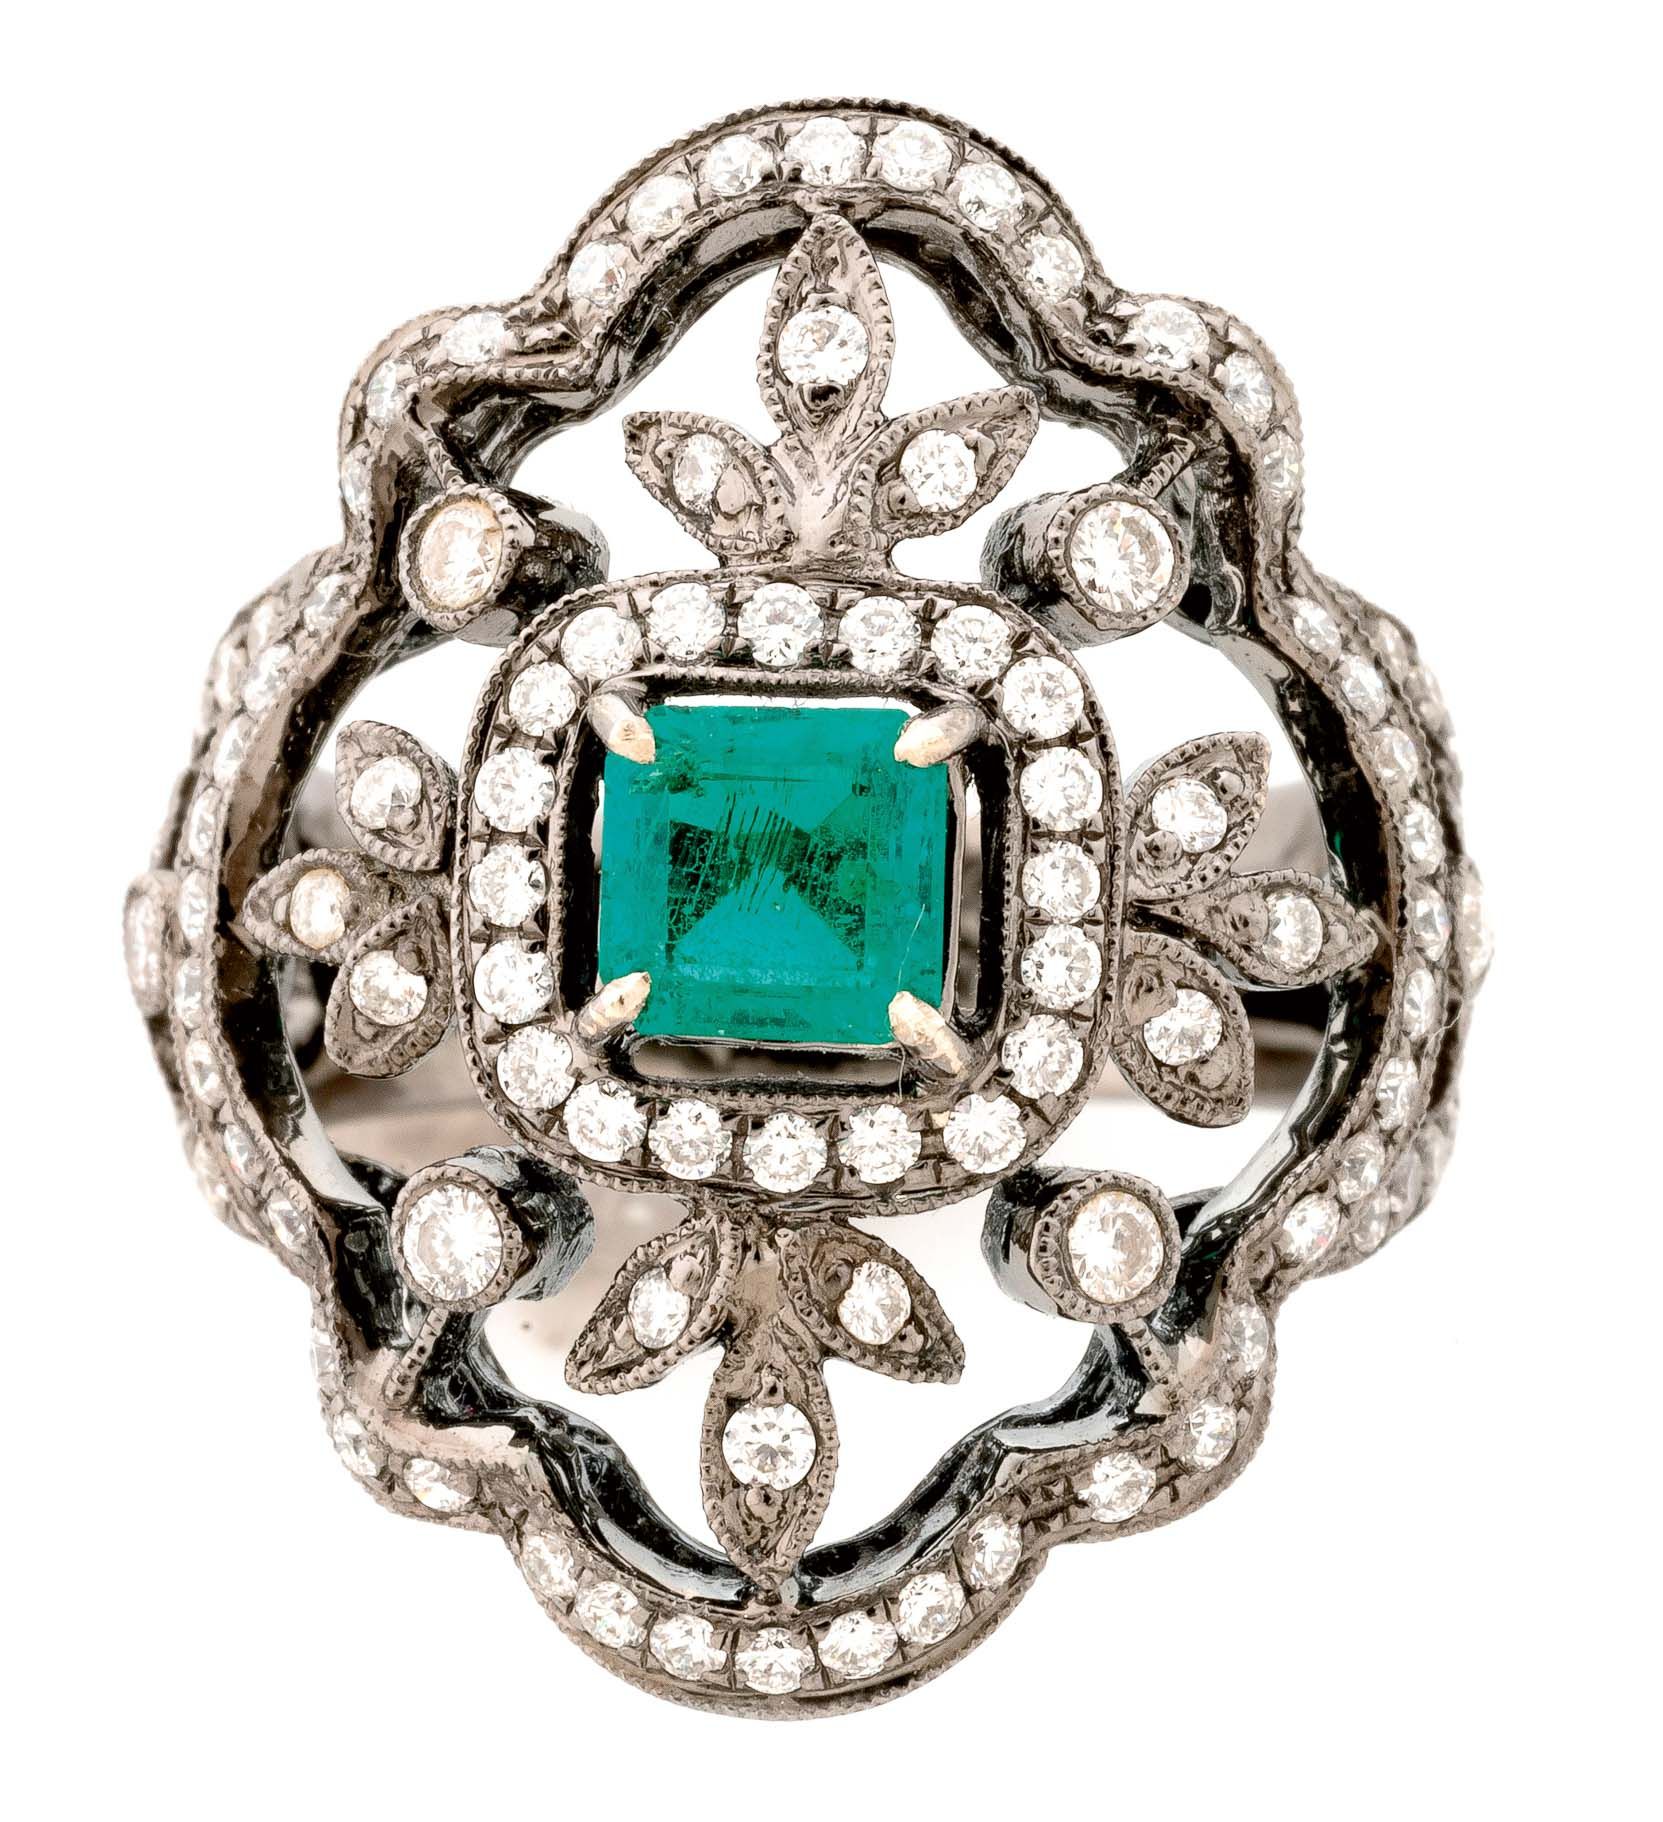 Null Blackened gold ring set with an emerald and diamonds - Gross weight: 9.8 g